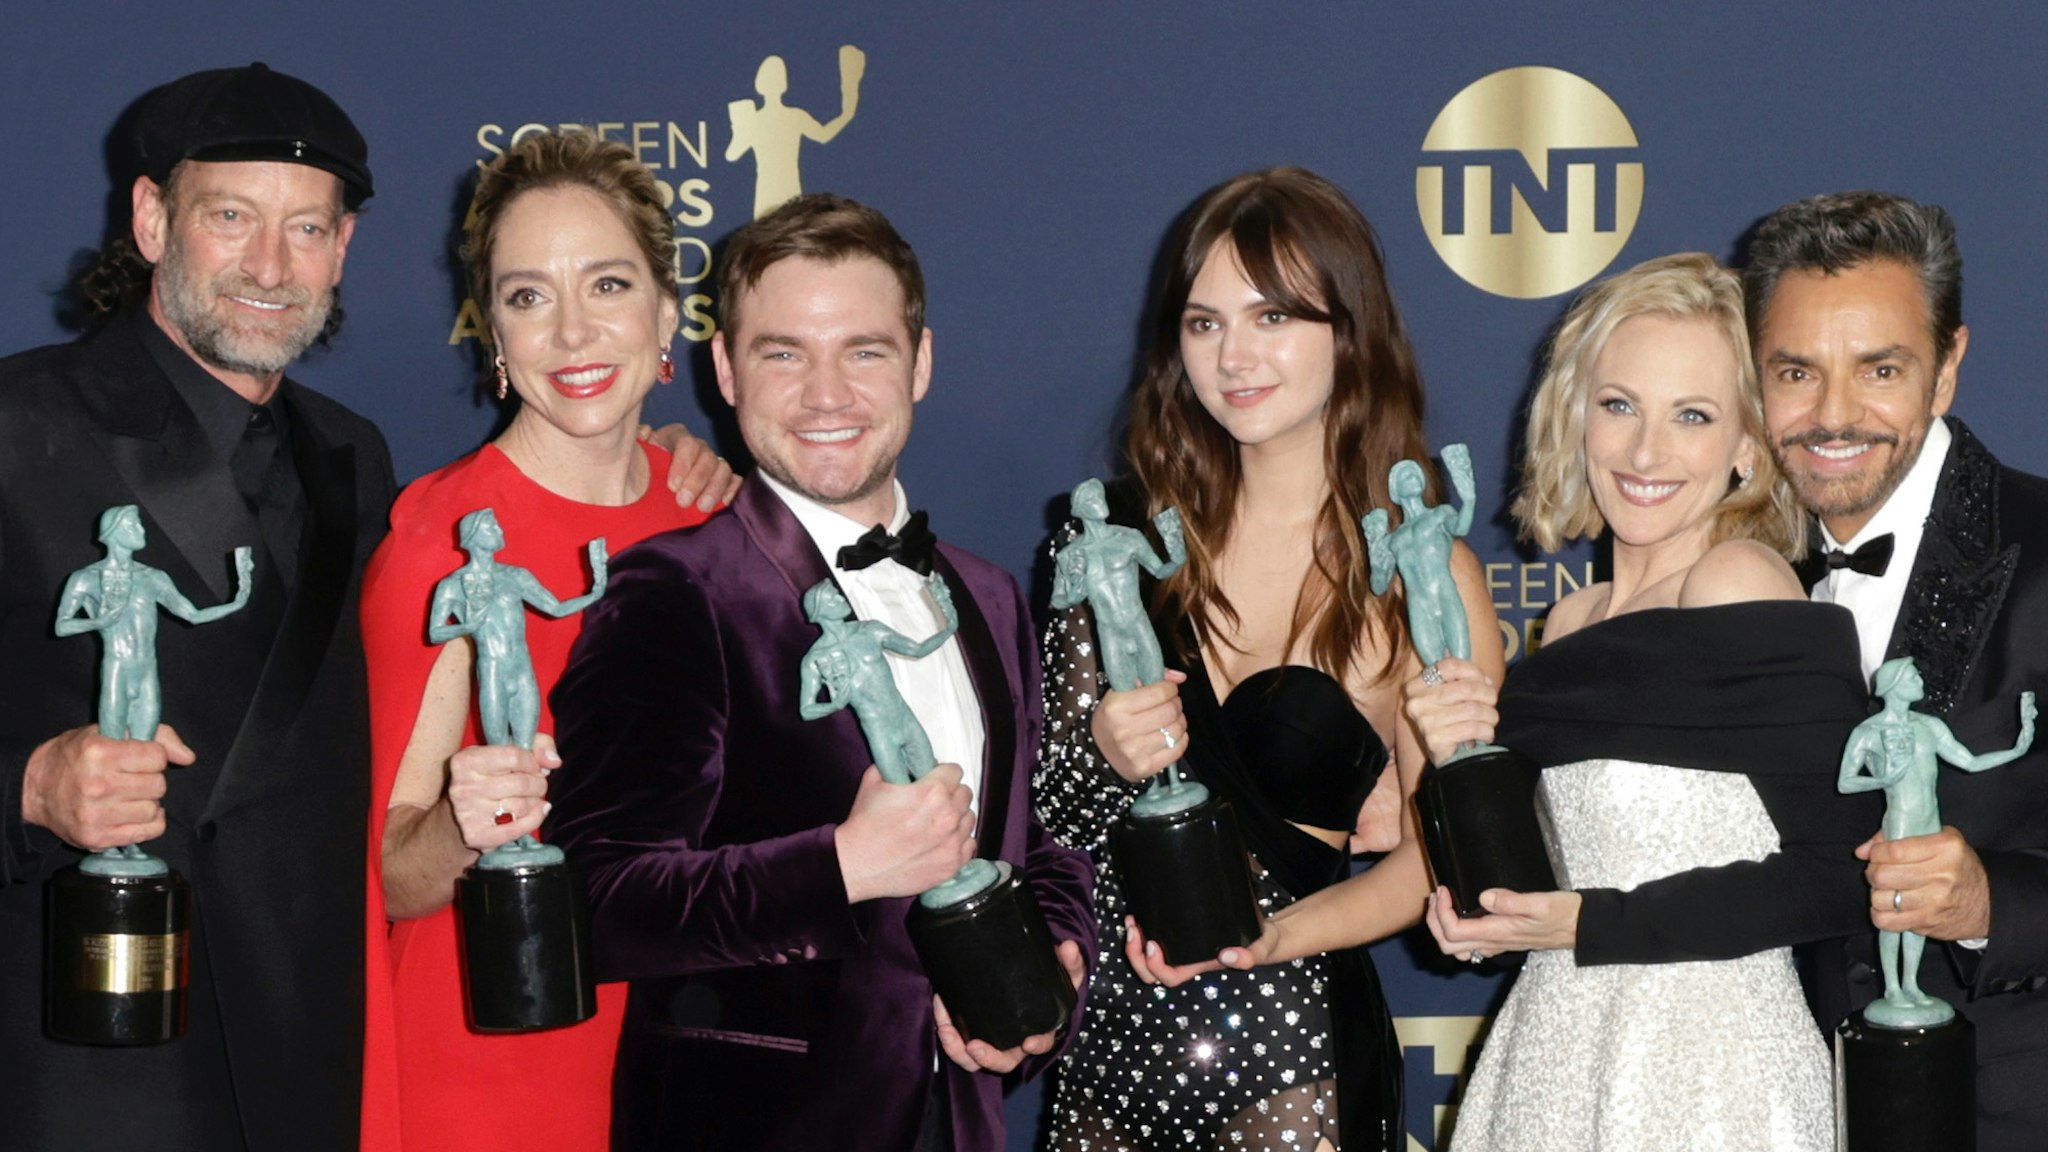 Troy Kotsur, Sian Heder, Daniel Durant, Emilia Jones, Marlee Matlin and Eugenio Derbez, winners of Outstanding Performance by a Cast in a Motion Picture for CODA, pose in the press room during the 28th Annual Screen Actors Guild Awards at Barker Hangar on February 27, 2022 in Santa Monica, California.